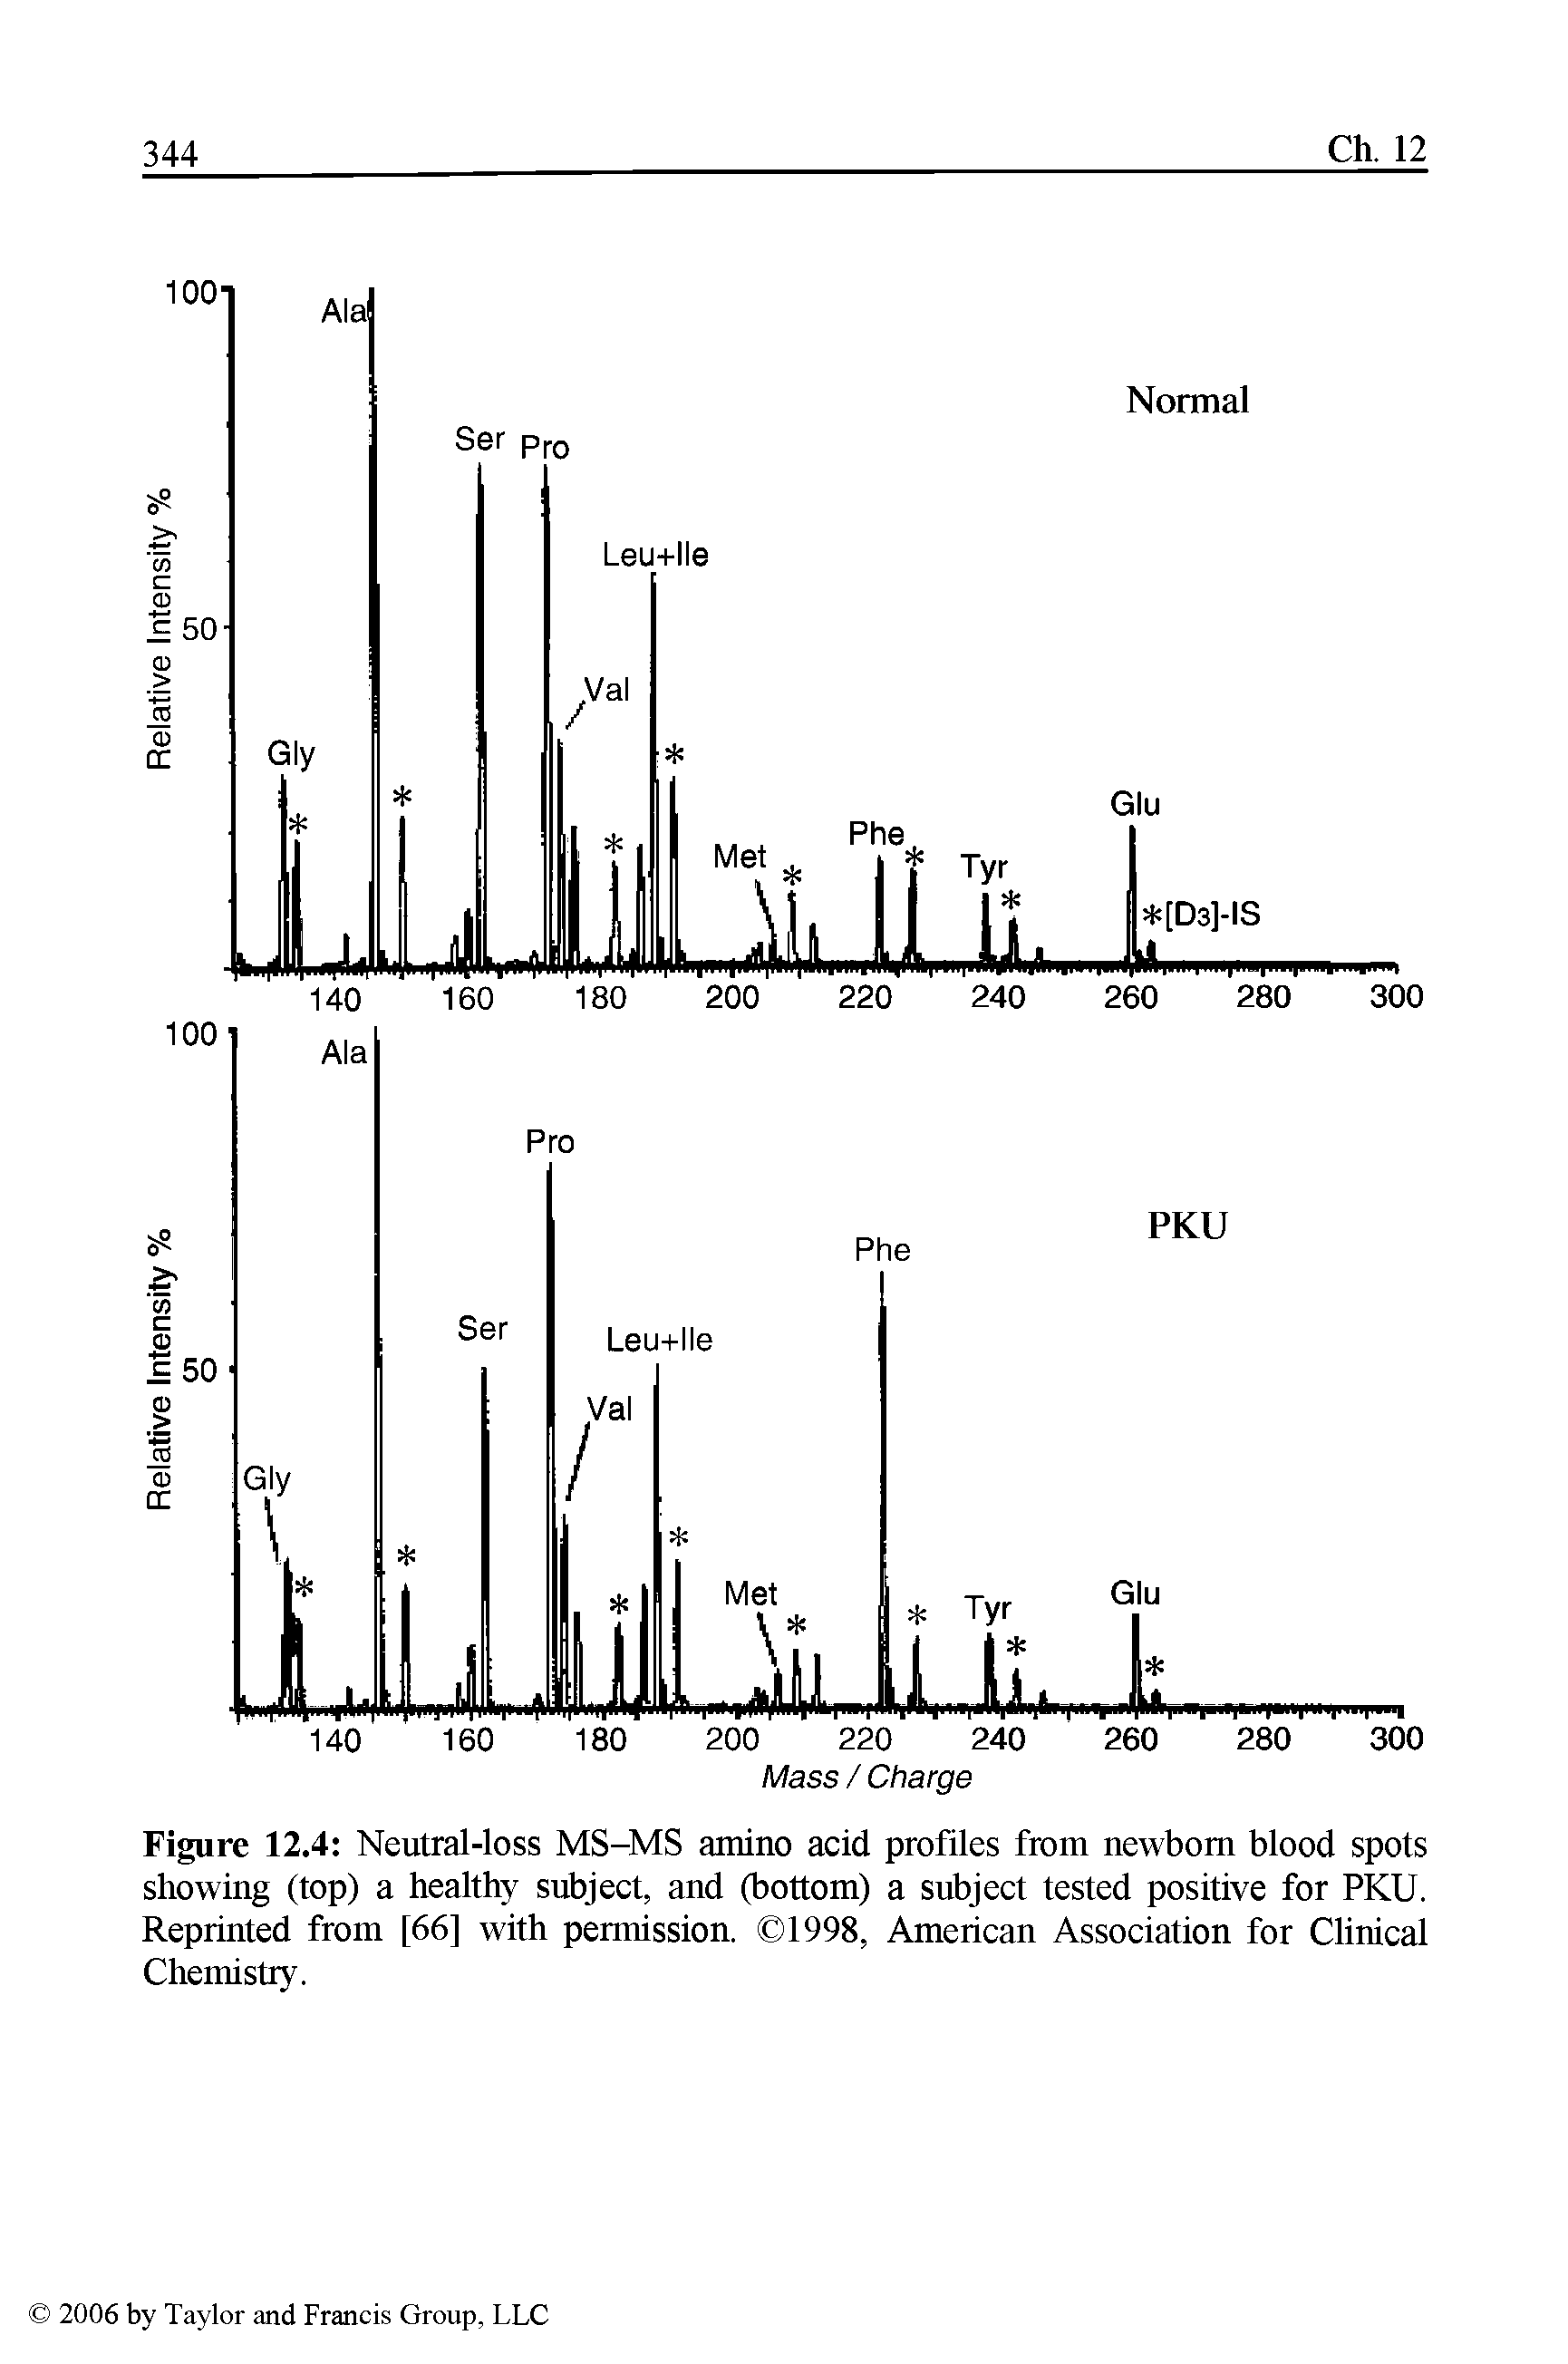 Figure 12.4 Neutral-loss MS-MS amino acid profiles from newborn blood spots showing (top) a healthy subject, and (bottom) a subject tested positive for PKU. Reprinted from [66] with permission. 1998, American Association for Clinical Chemistry.